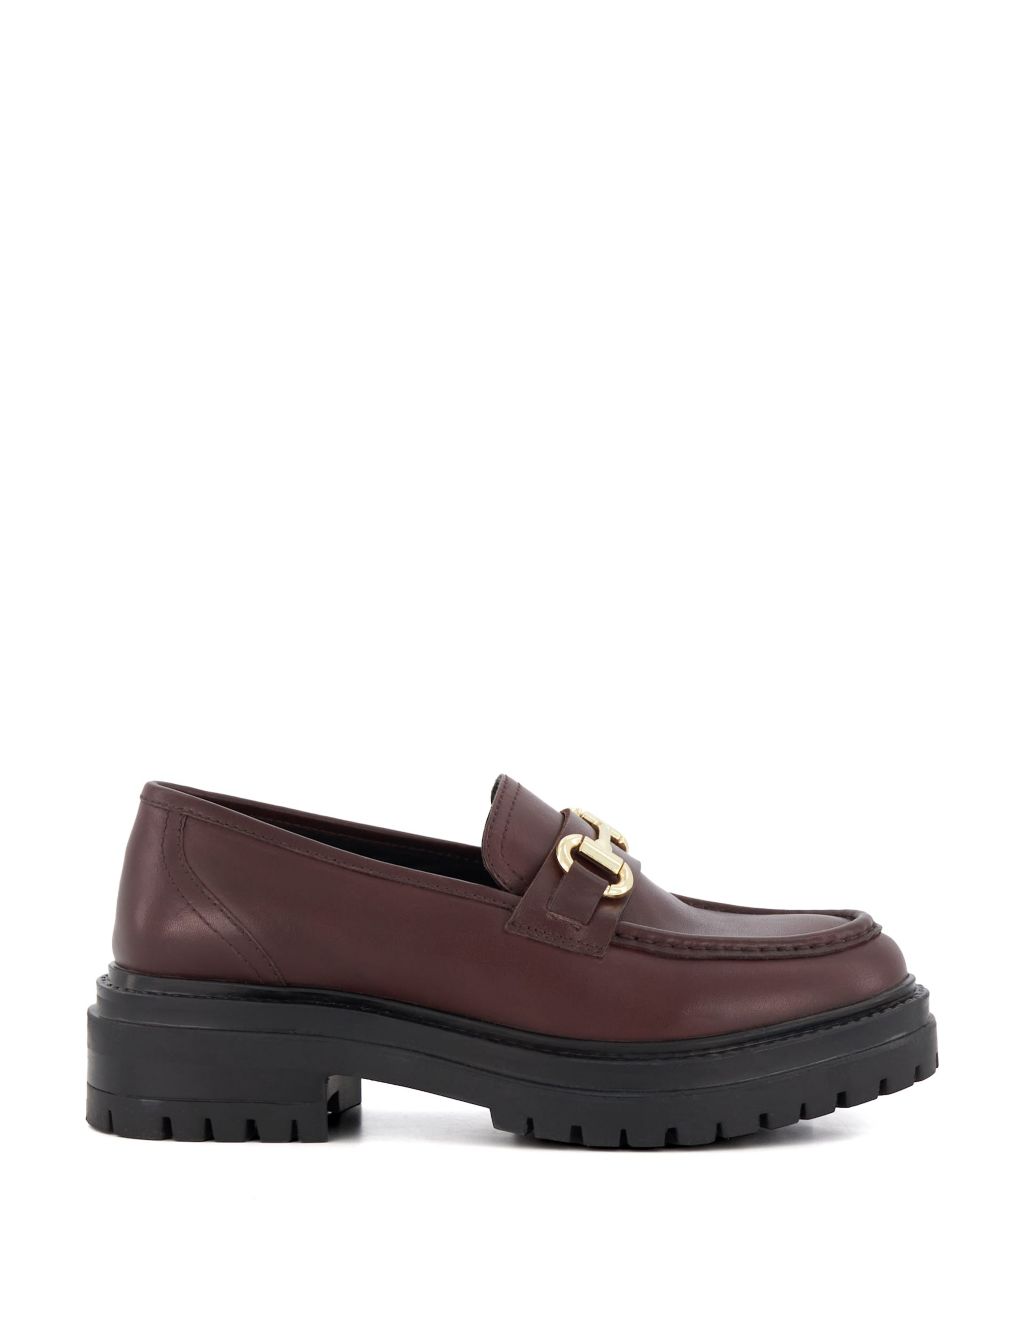 Leather Chunky Bar Flat Loafers image 1